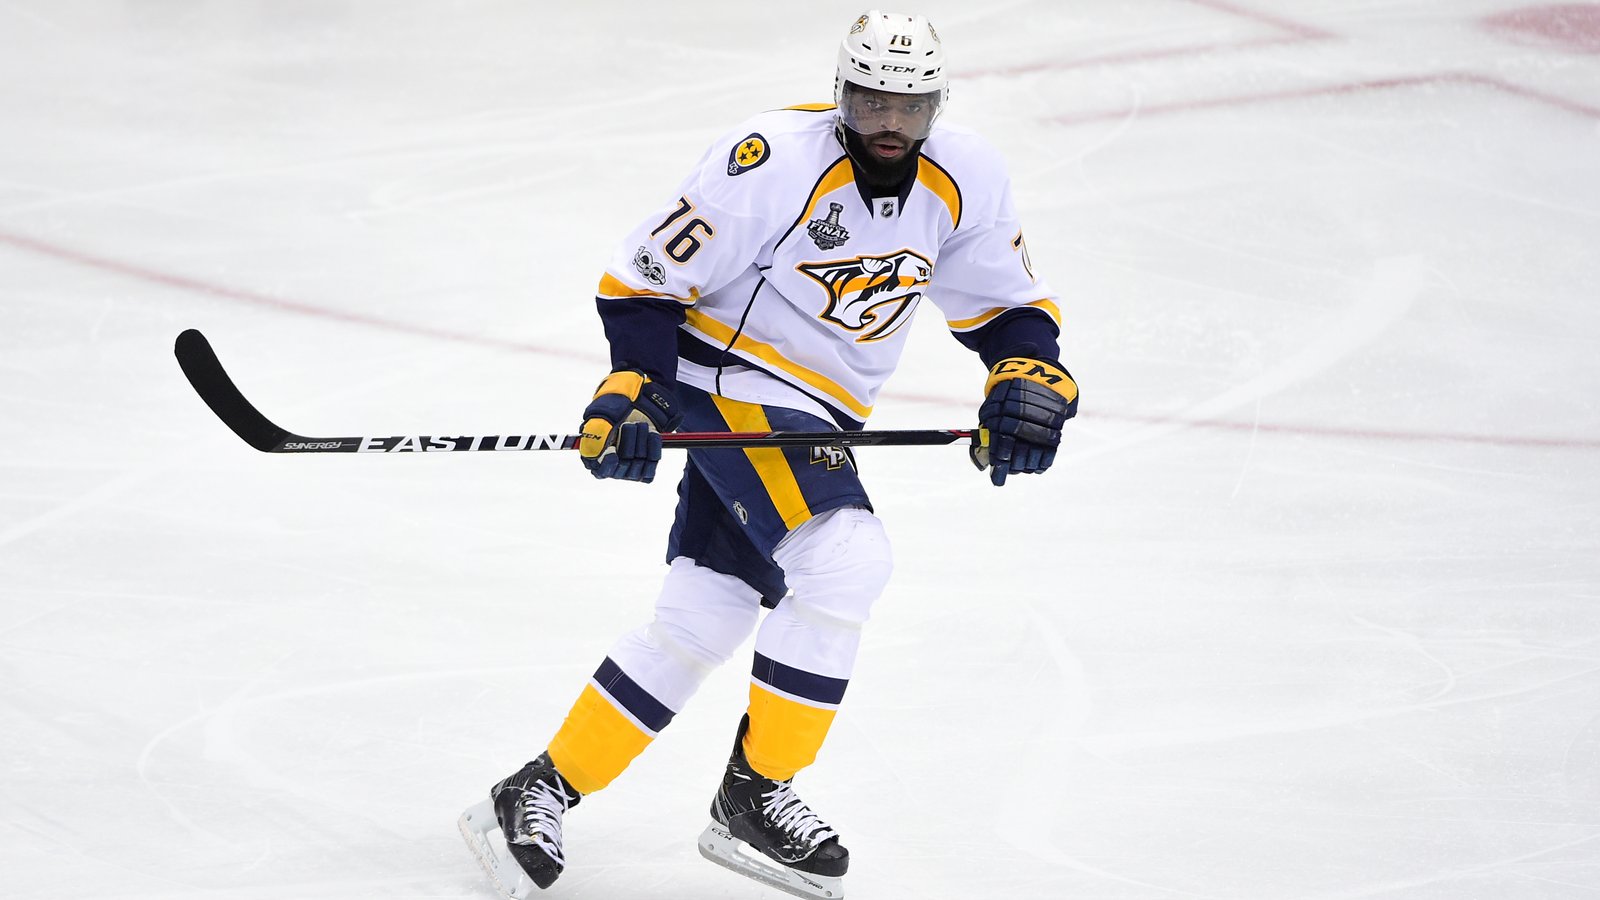 Must See: PK Subban poses for photo with NBA legend